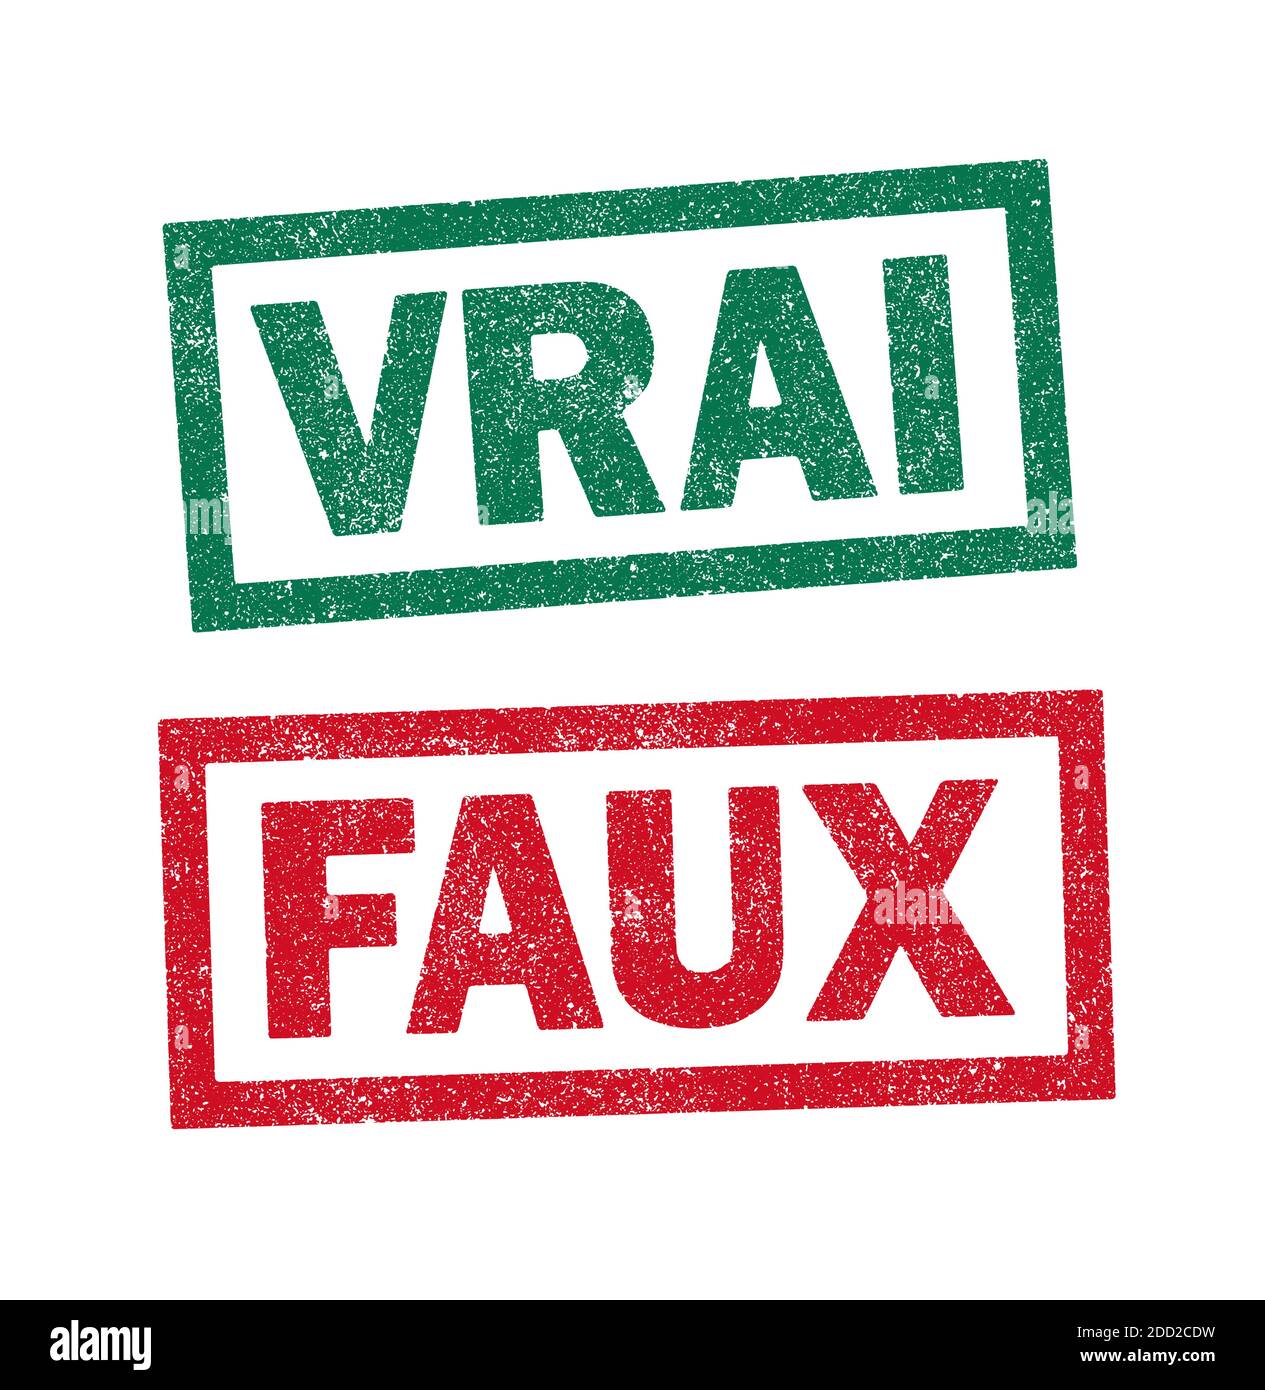 Vector illustration of the words Vrai and Faux (Right 'green' and Wrong 'red' in French) in green and red ink stamps Stock Vector